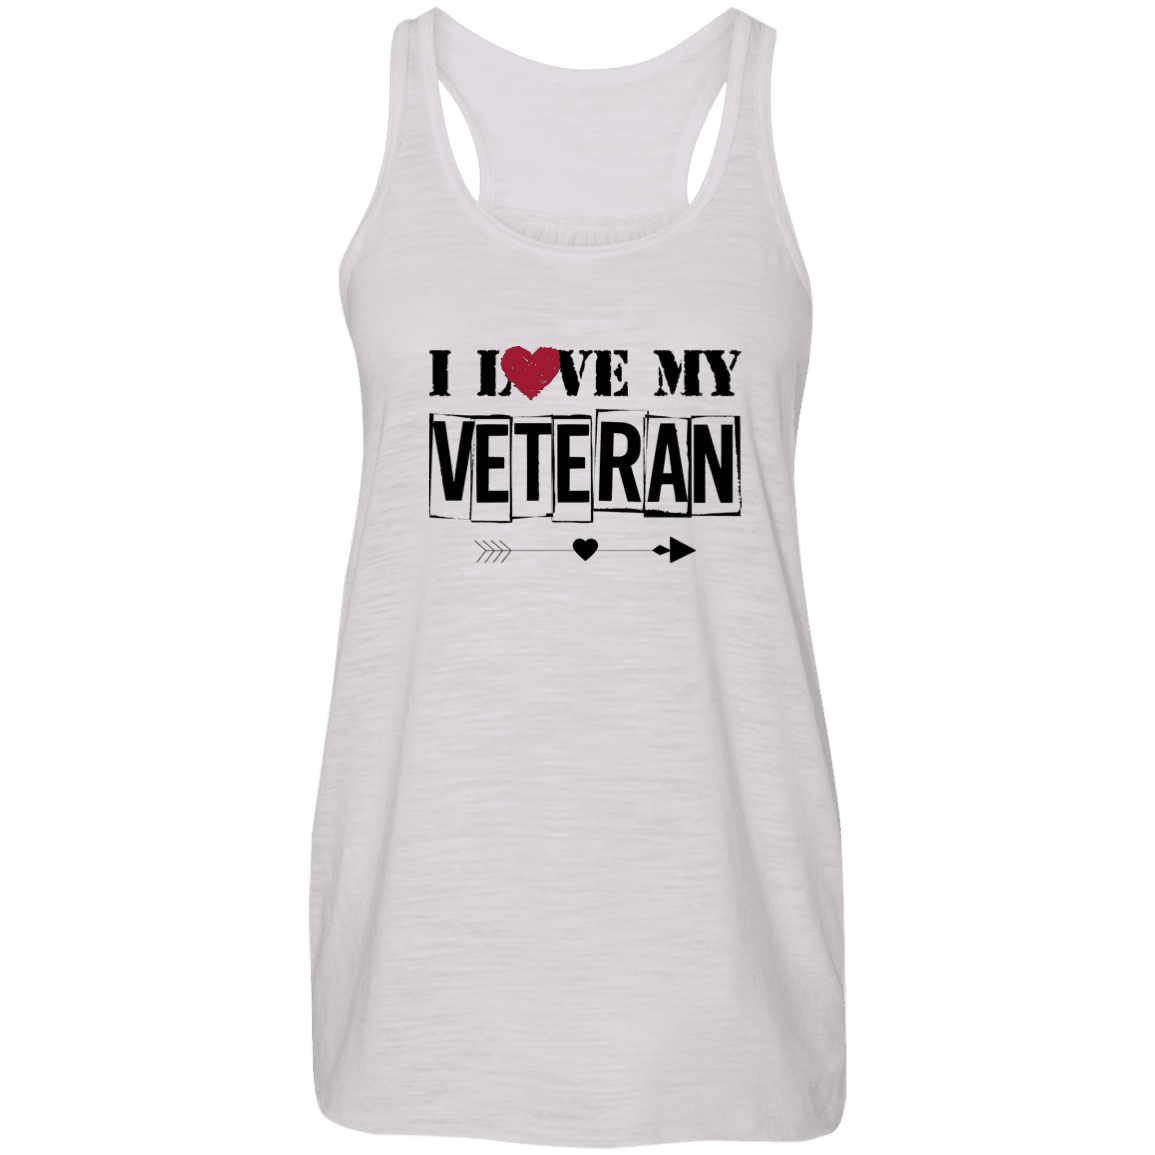 Designs by MyUtopia Shout Out:I Love My Veteran Ladies Flowy Racer-back Tank Top,Vintage White / X-Small,Tank Tops